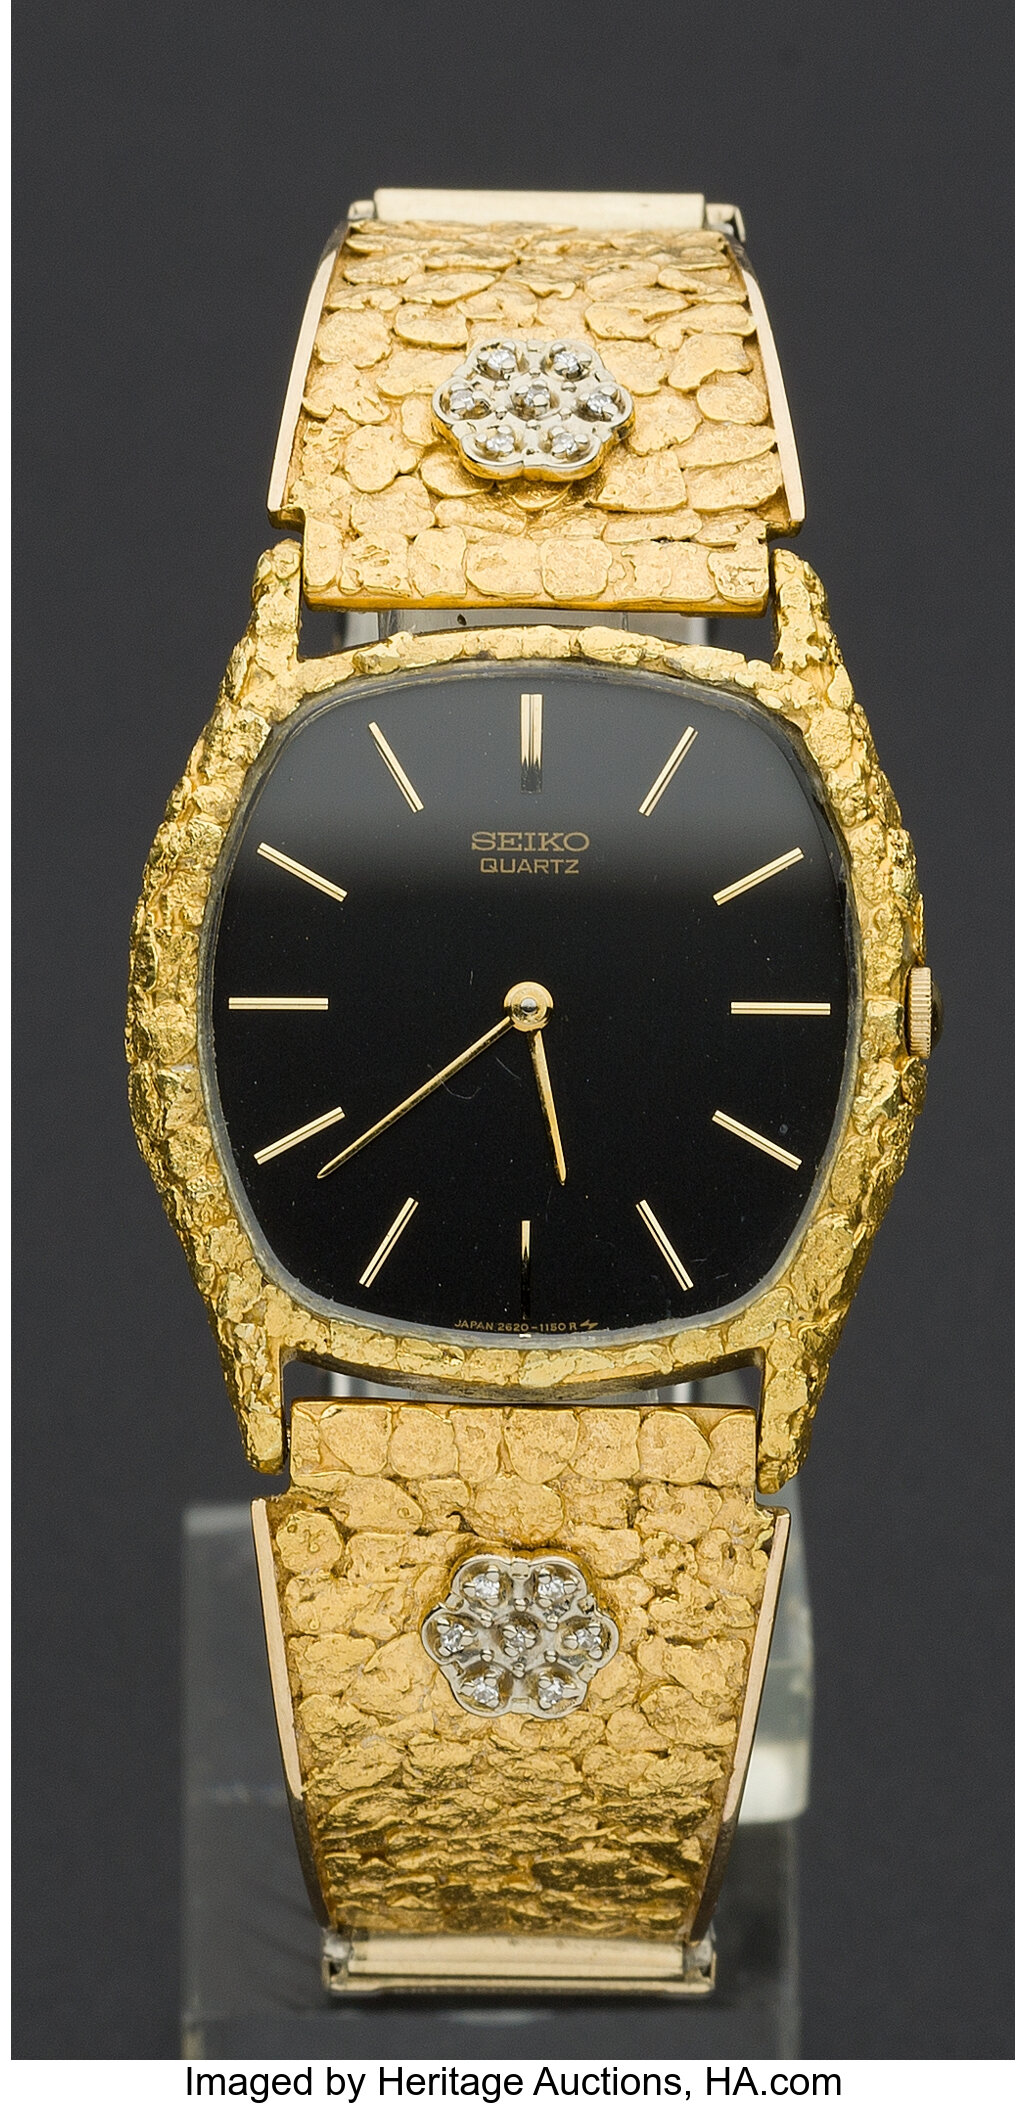 Seiko Gent's Diamond & Gold Nugget Watch. ... Timepieces | Lot #74008 |  Heritage Auctions